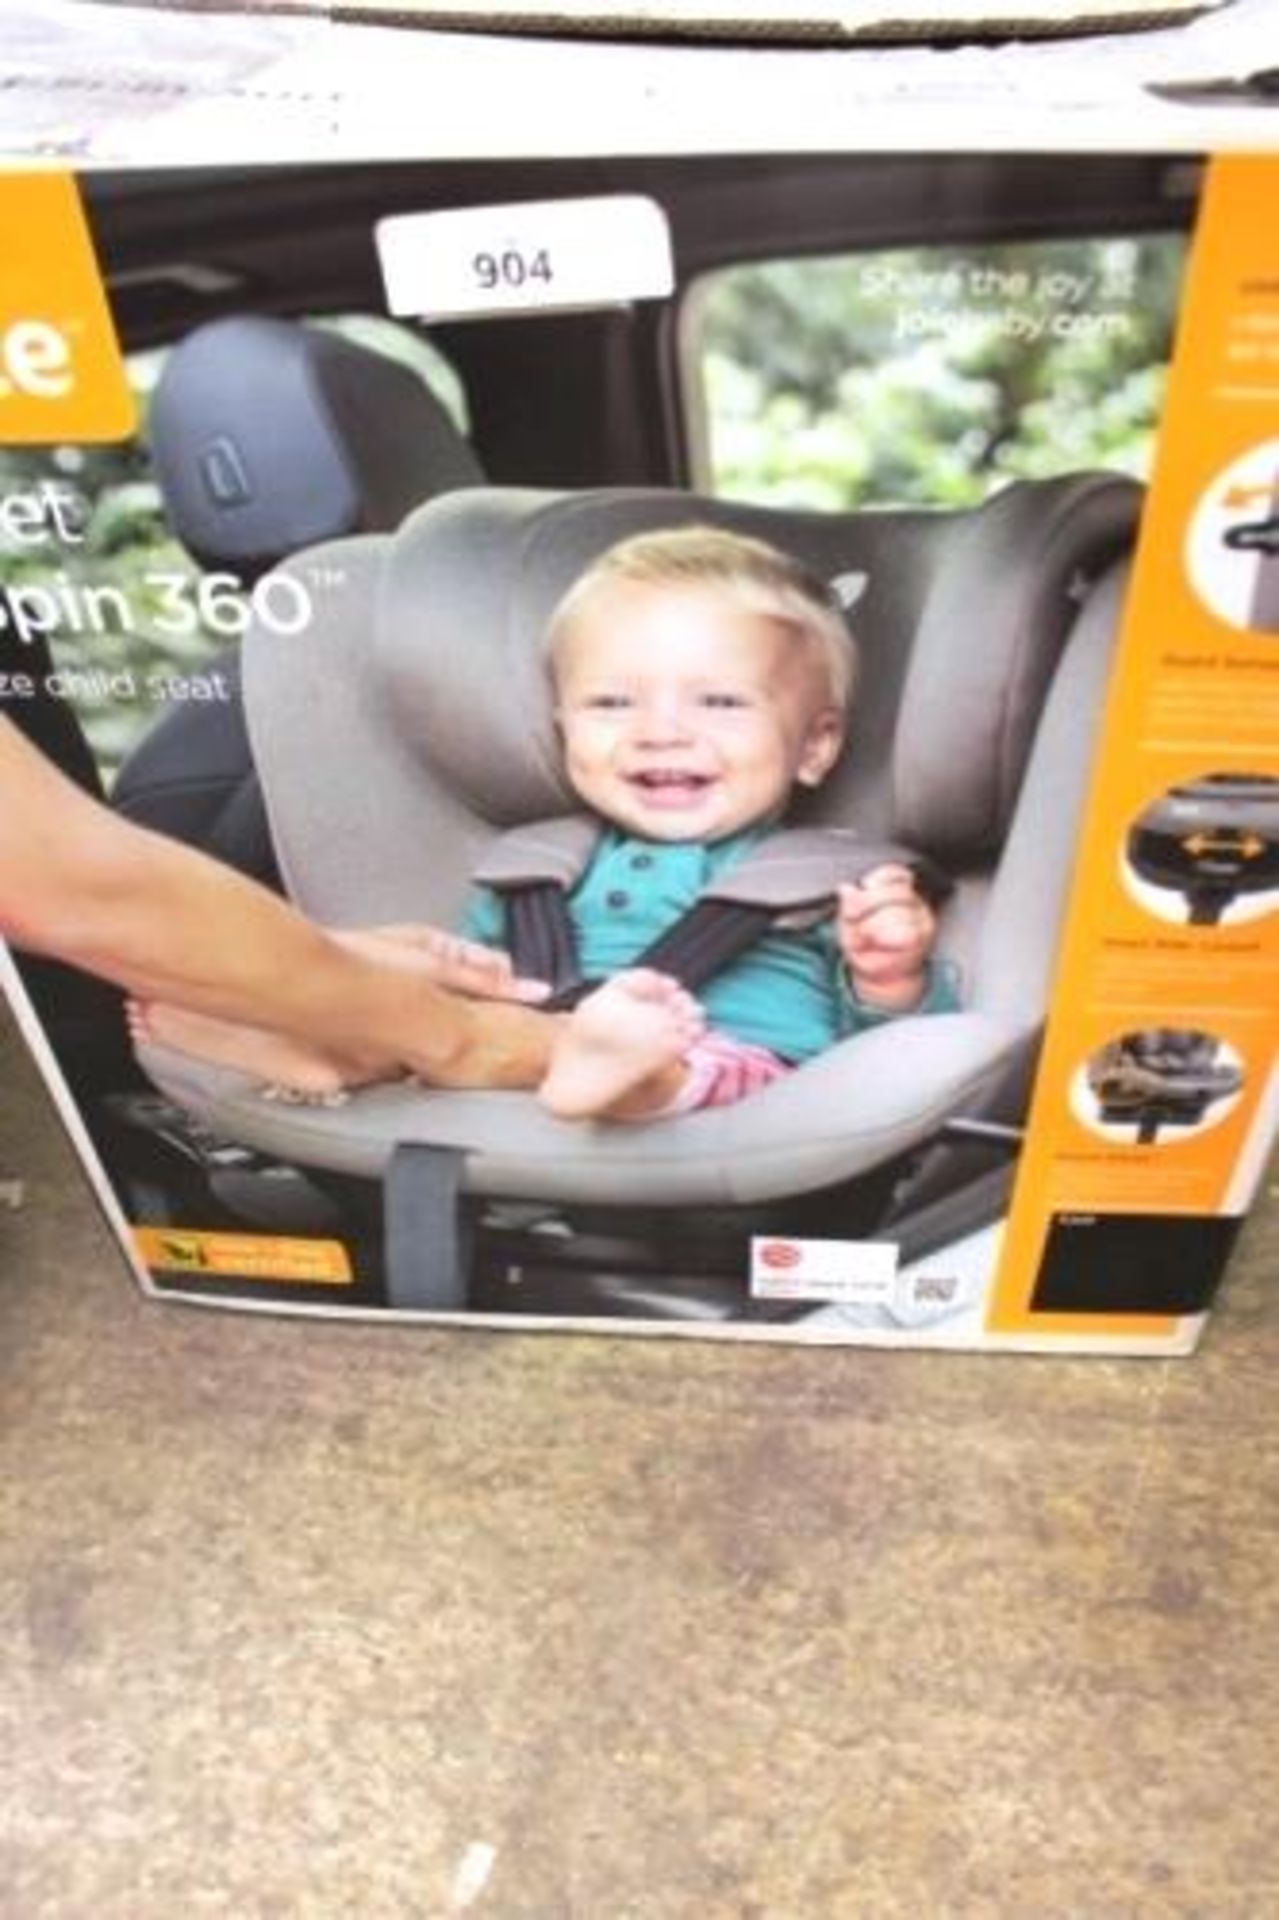 1 x Joie i-spin 360 car seat, birth to 19kg, coal - New in box (GS32C)